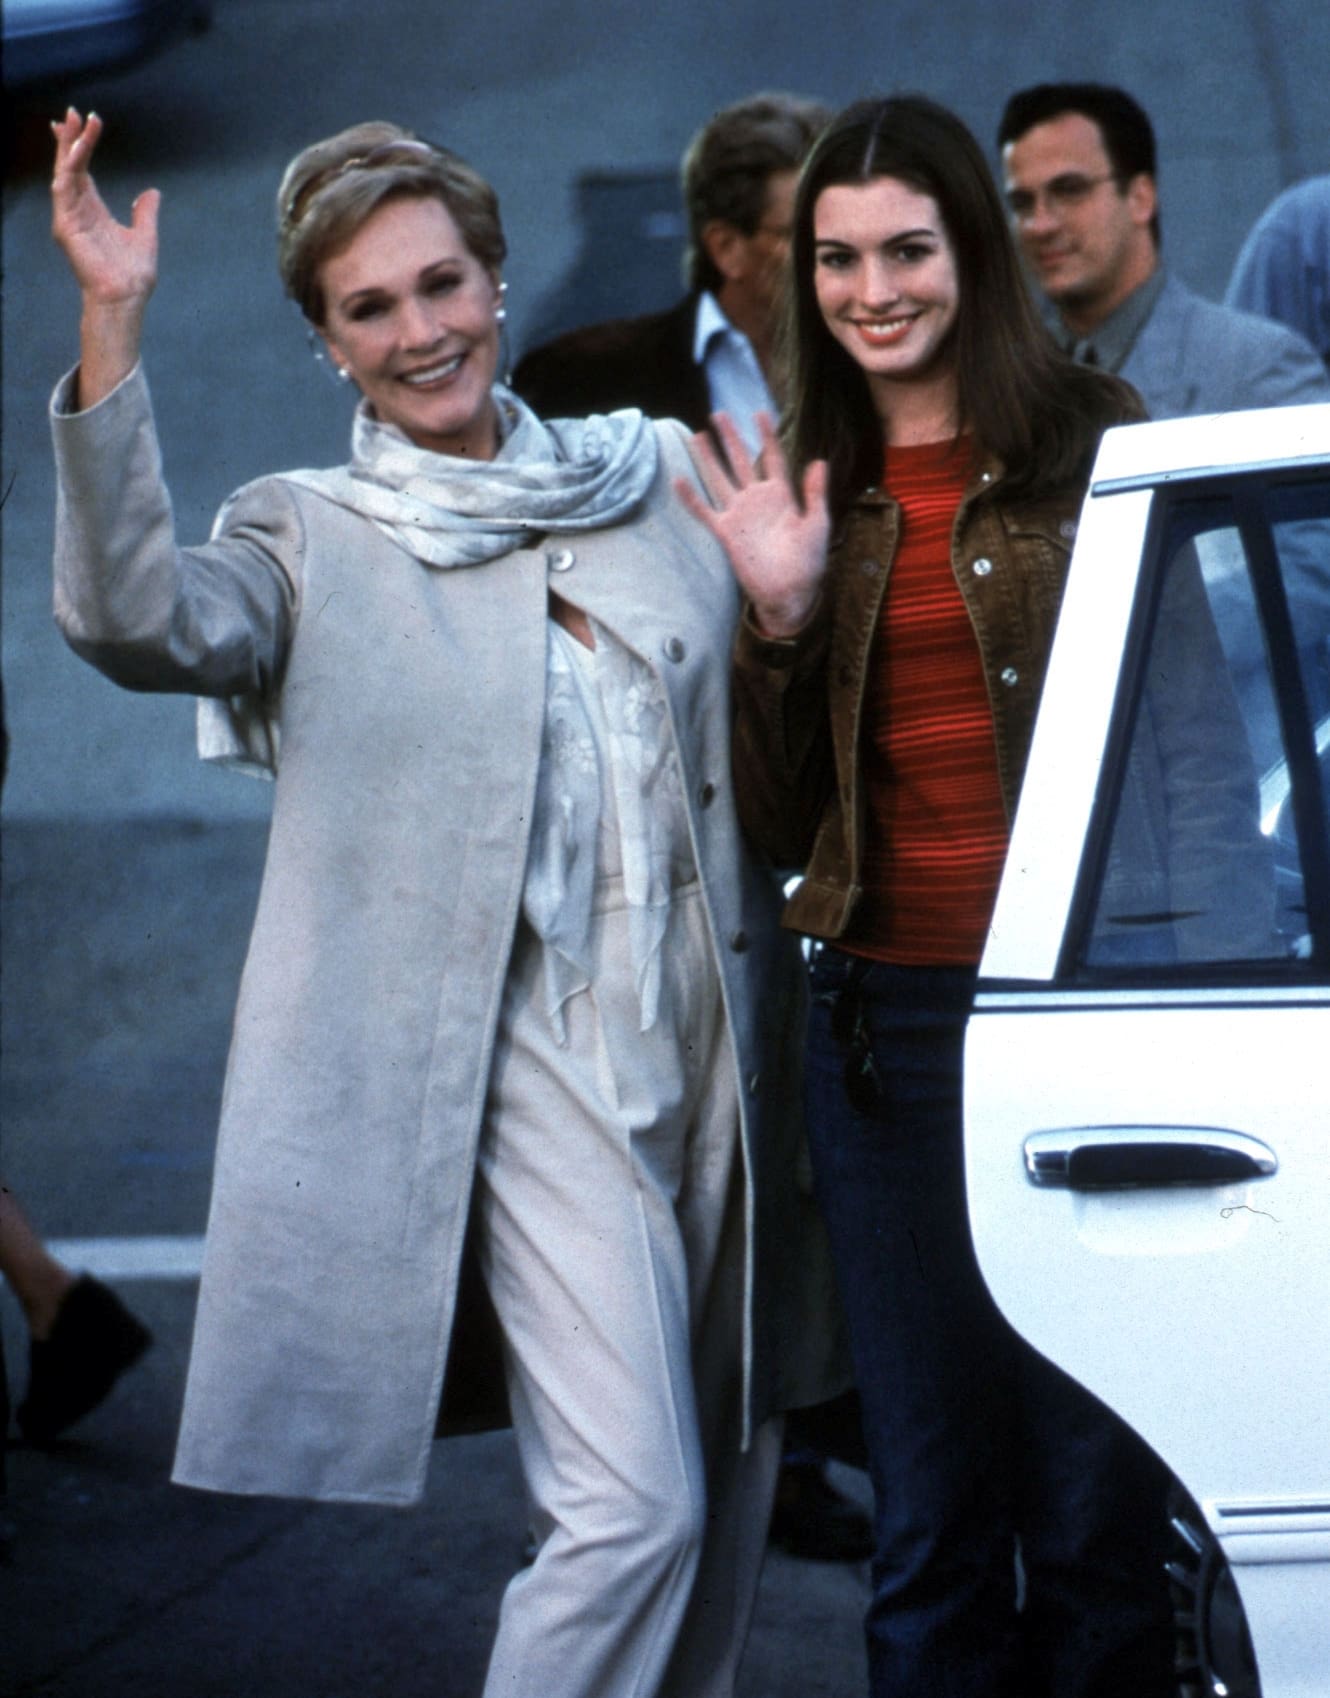 Anne Hathaway and Julie Andrews star in "The Princess Diaries"